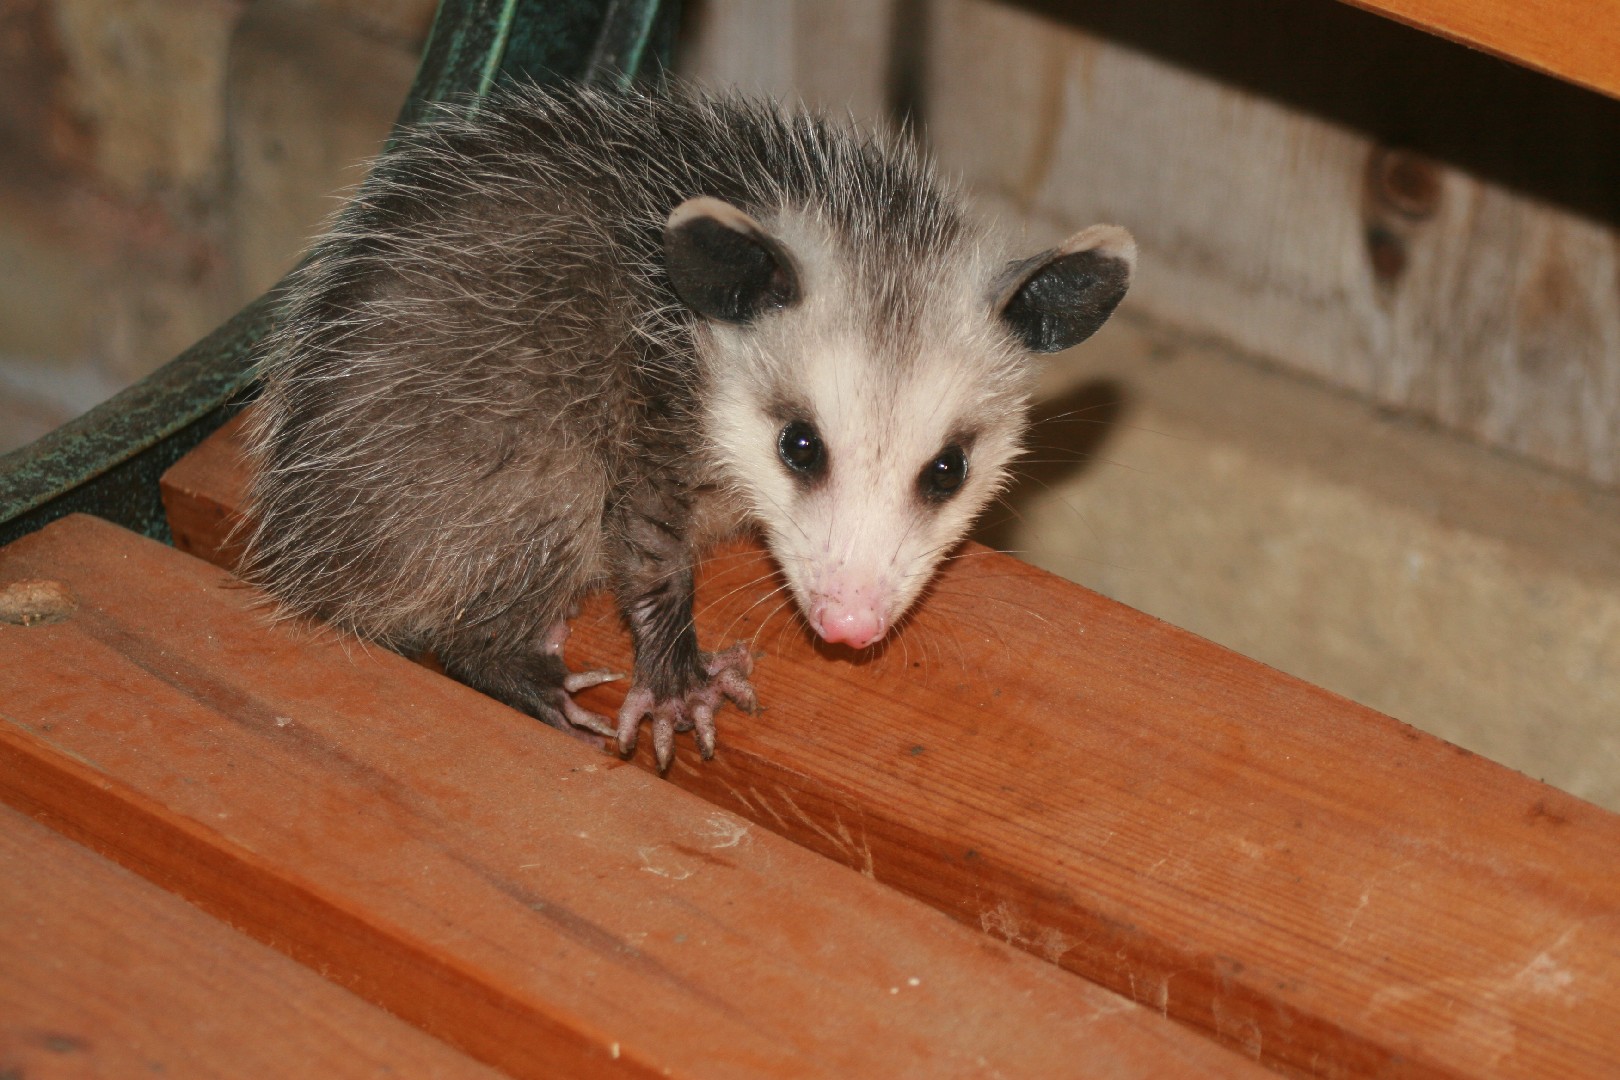 Large american opossums (Didelphis)